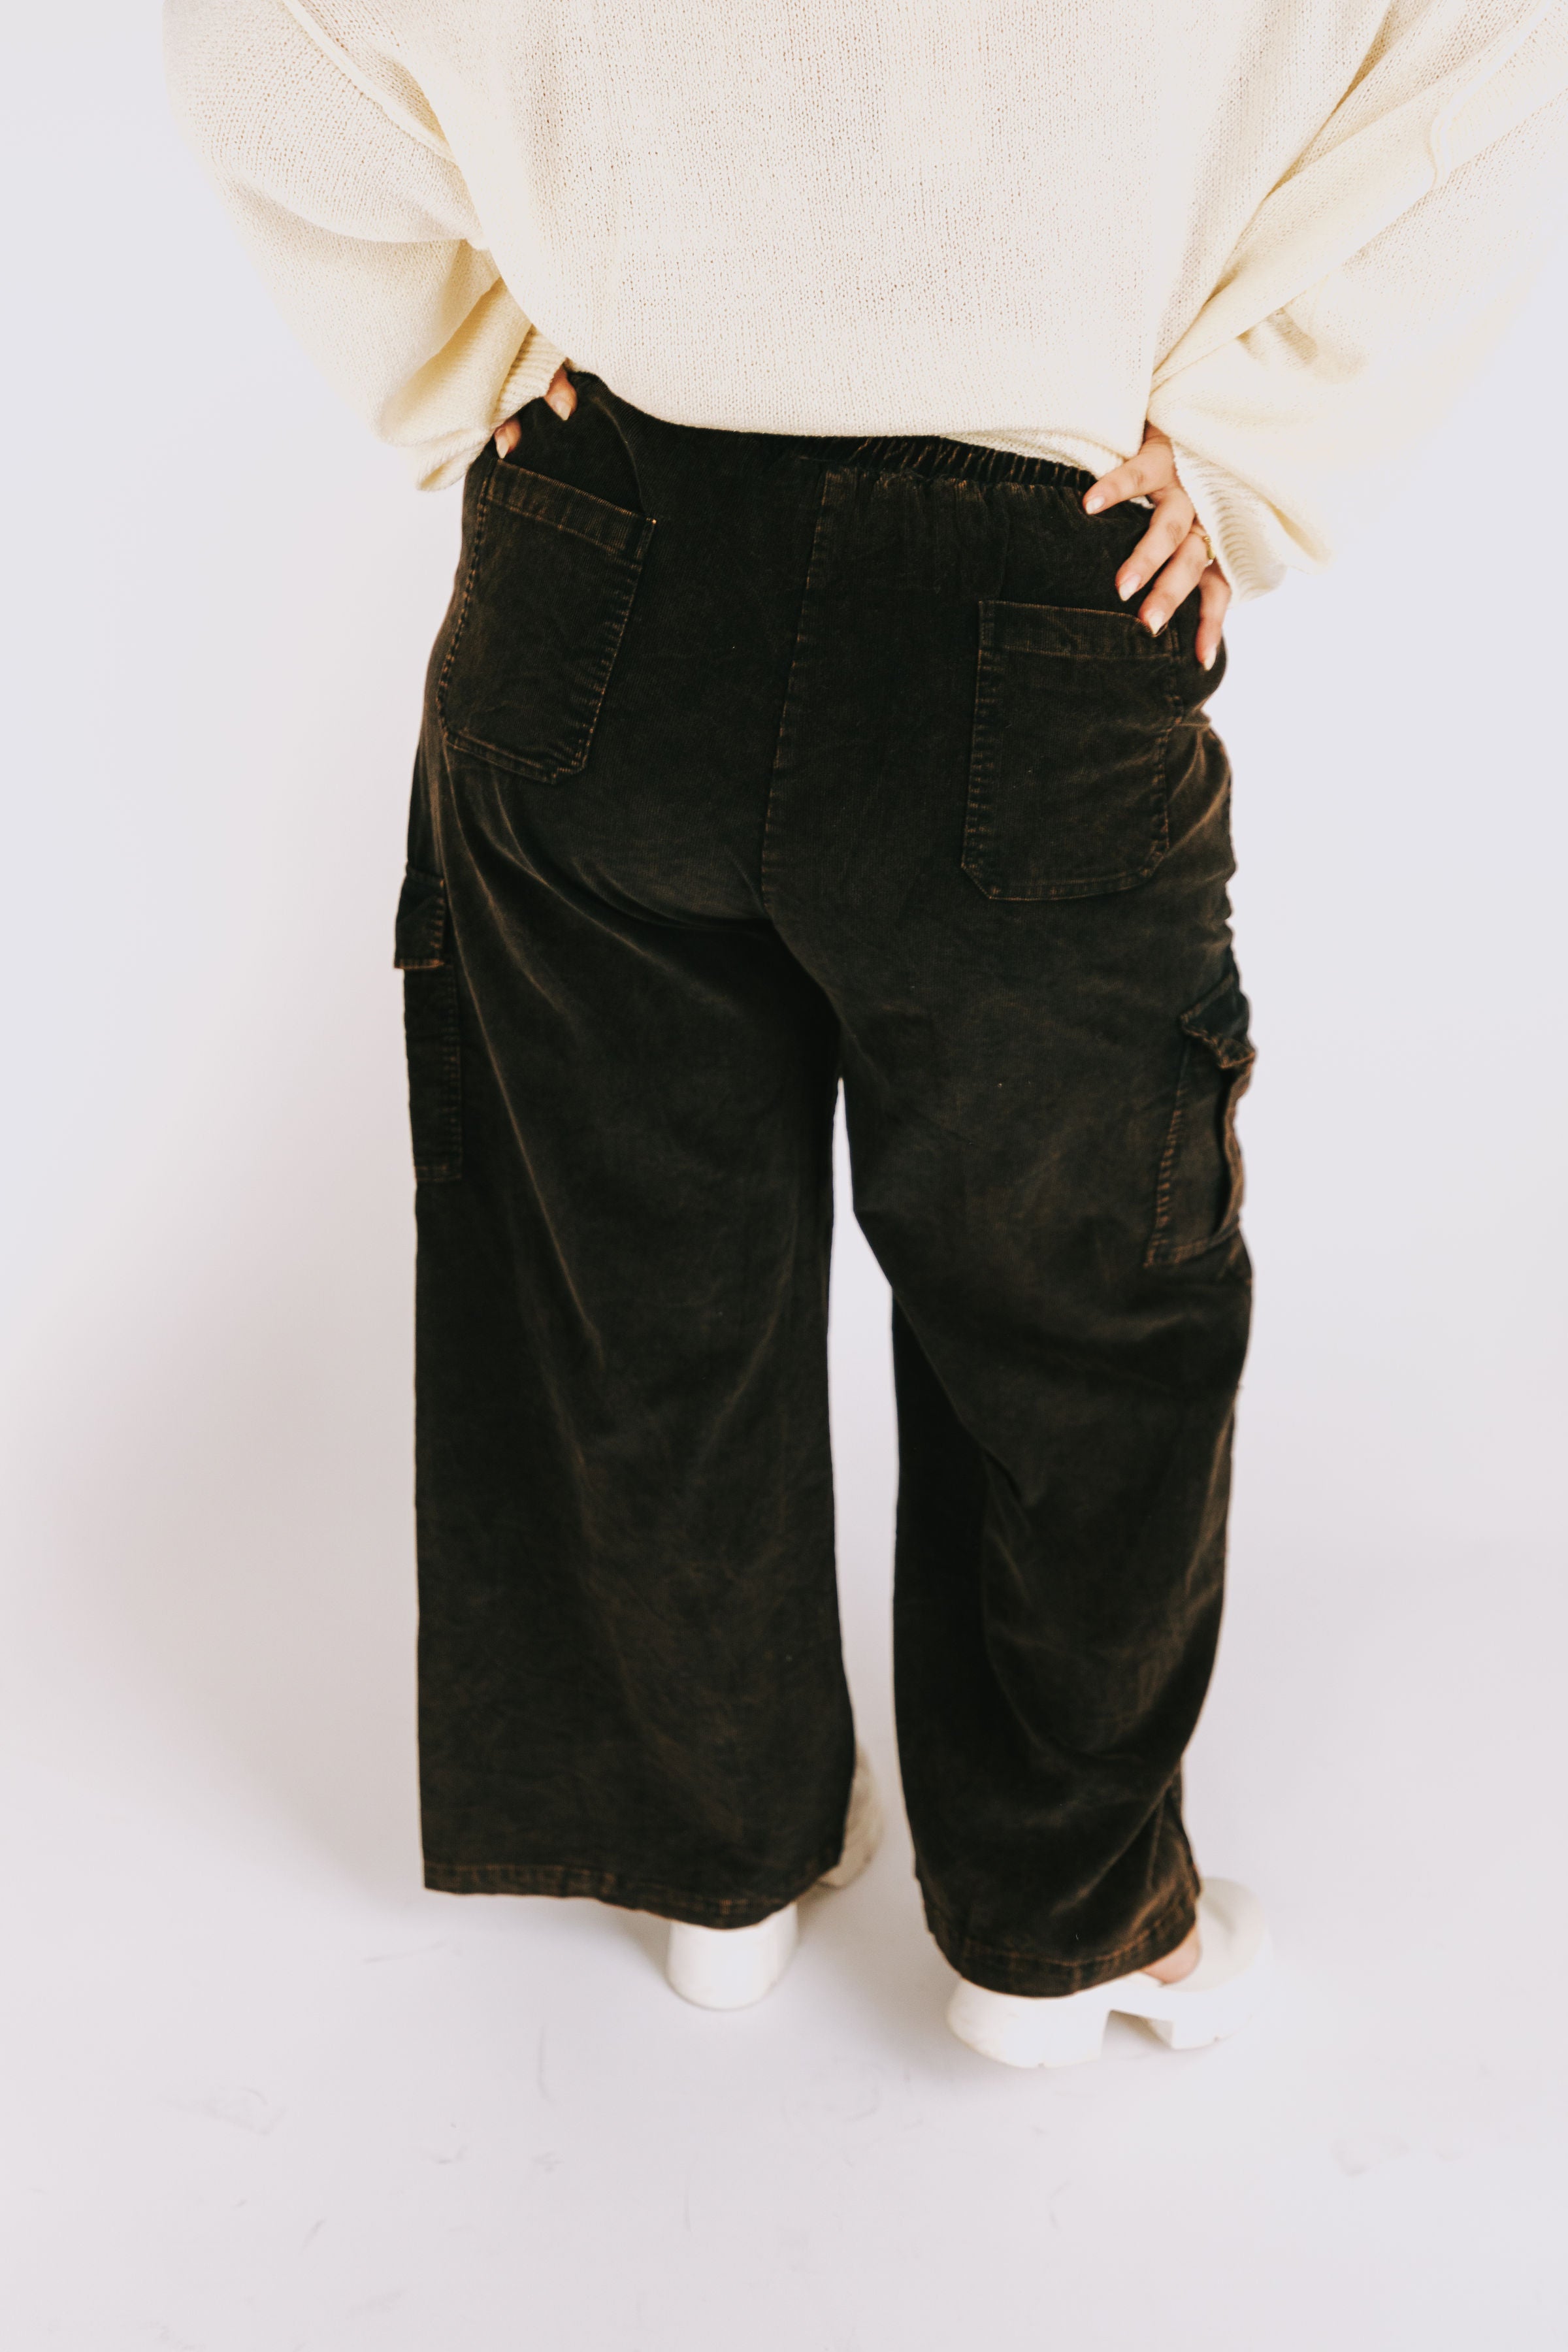 PLUS SIZE - Back To You Pants